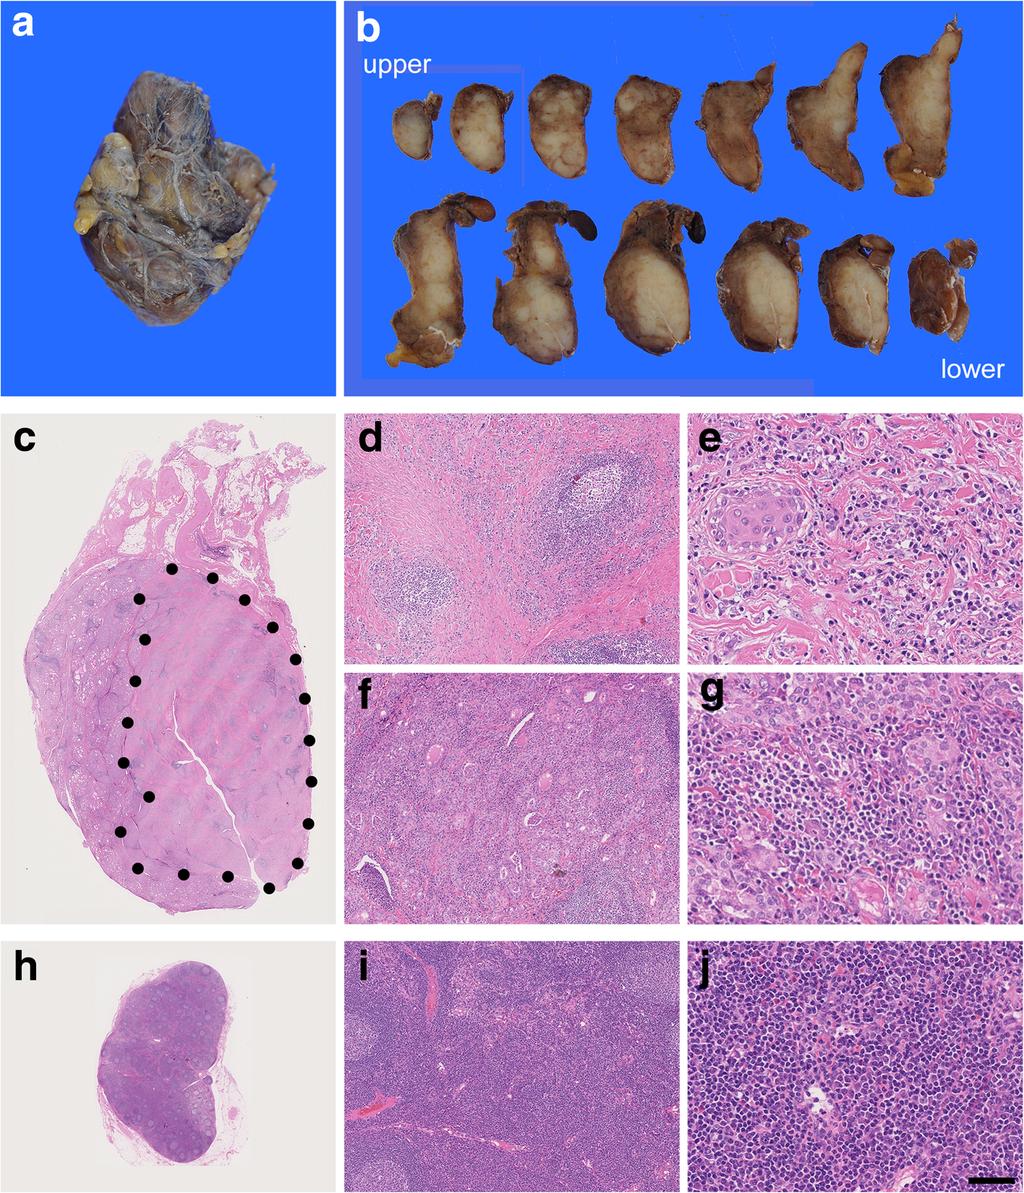 Sakai and Imamura Diagnostic Pathology (2018) 13:3 Page 3 of 5 Fig. 1 Gross and histological findings. a, b A circumscribed whitish mass measuring approximately 2.